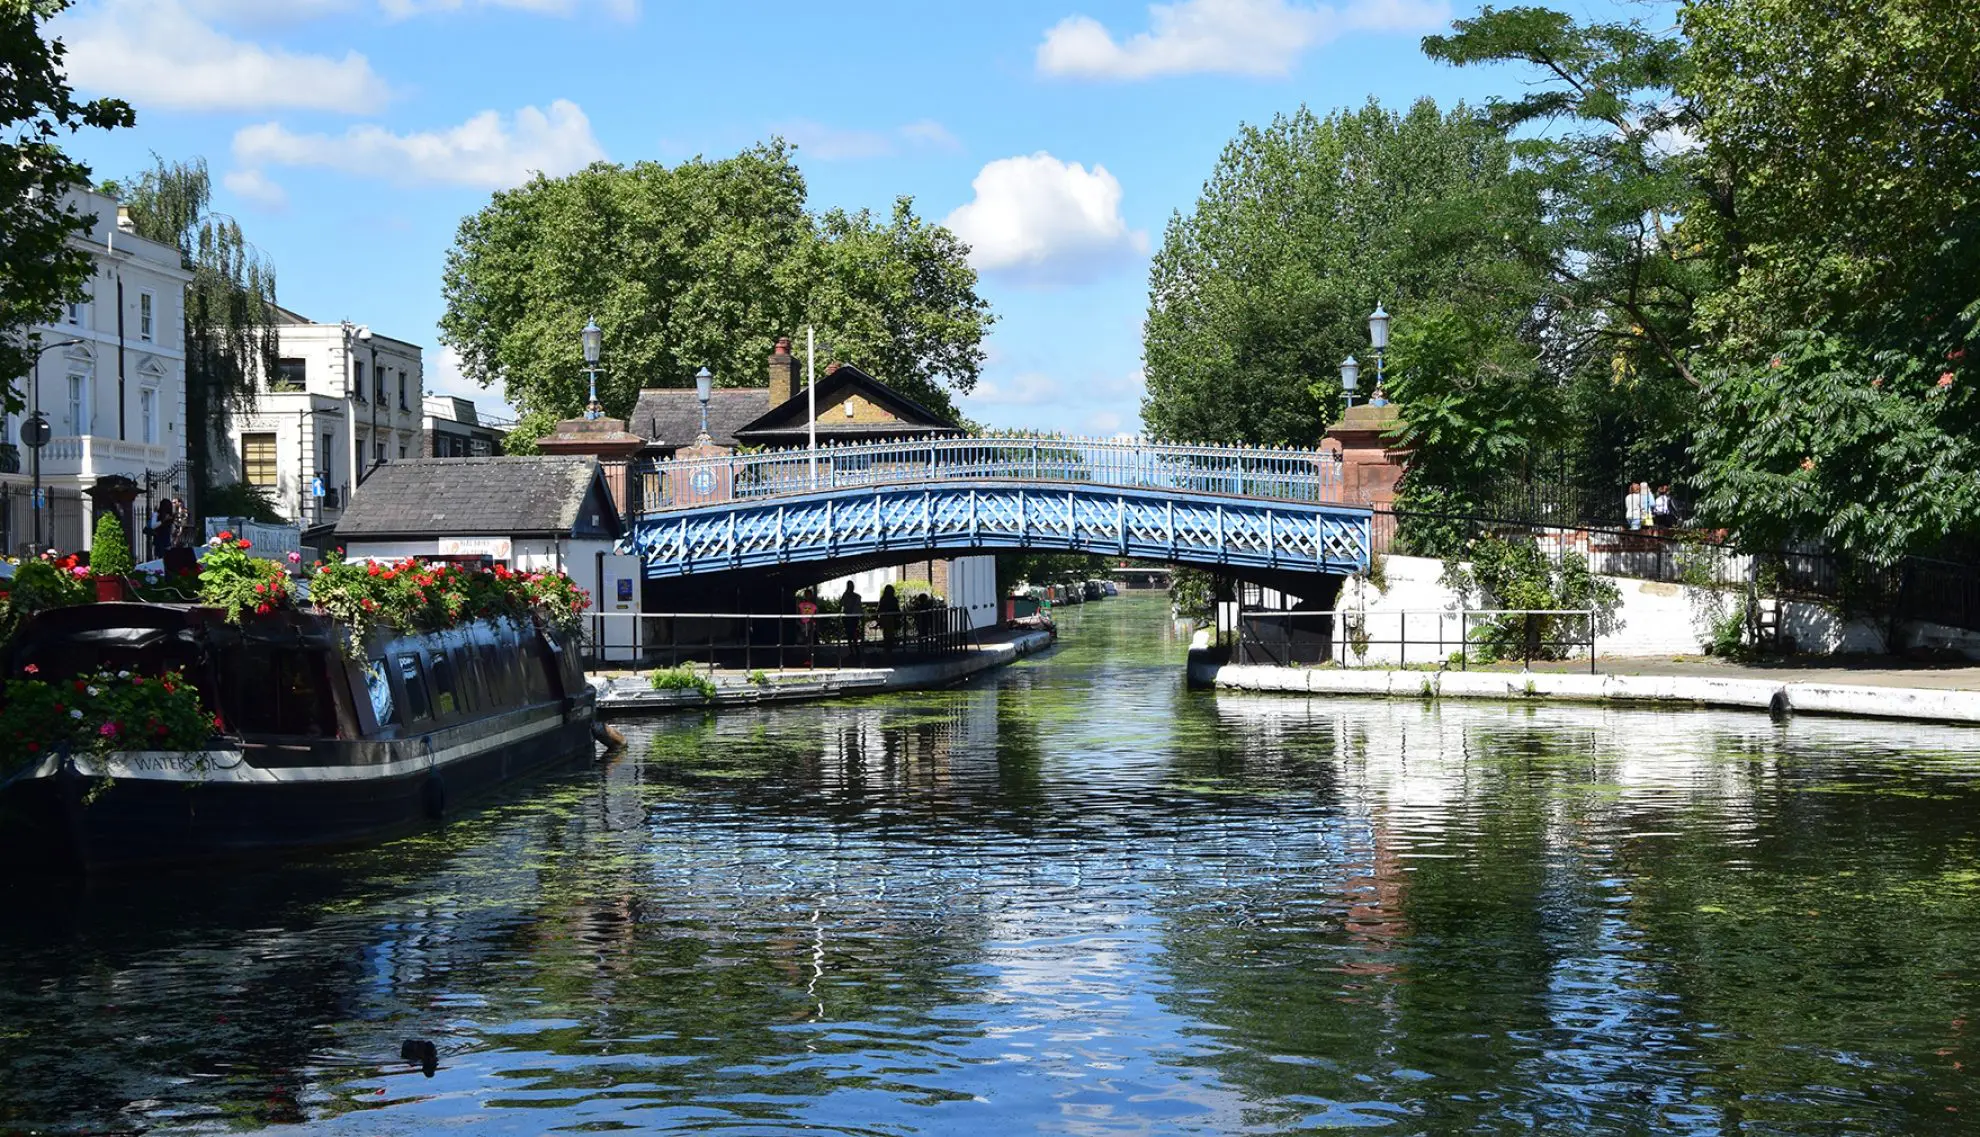 Bridge over the canal in Little Venice in the London W9 postcode